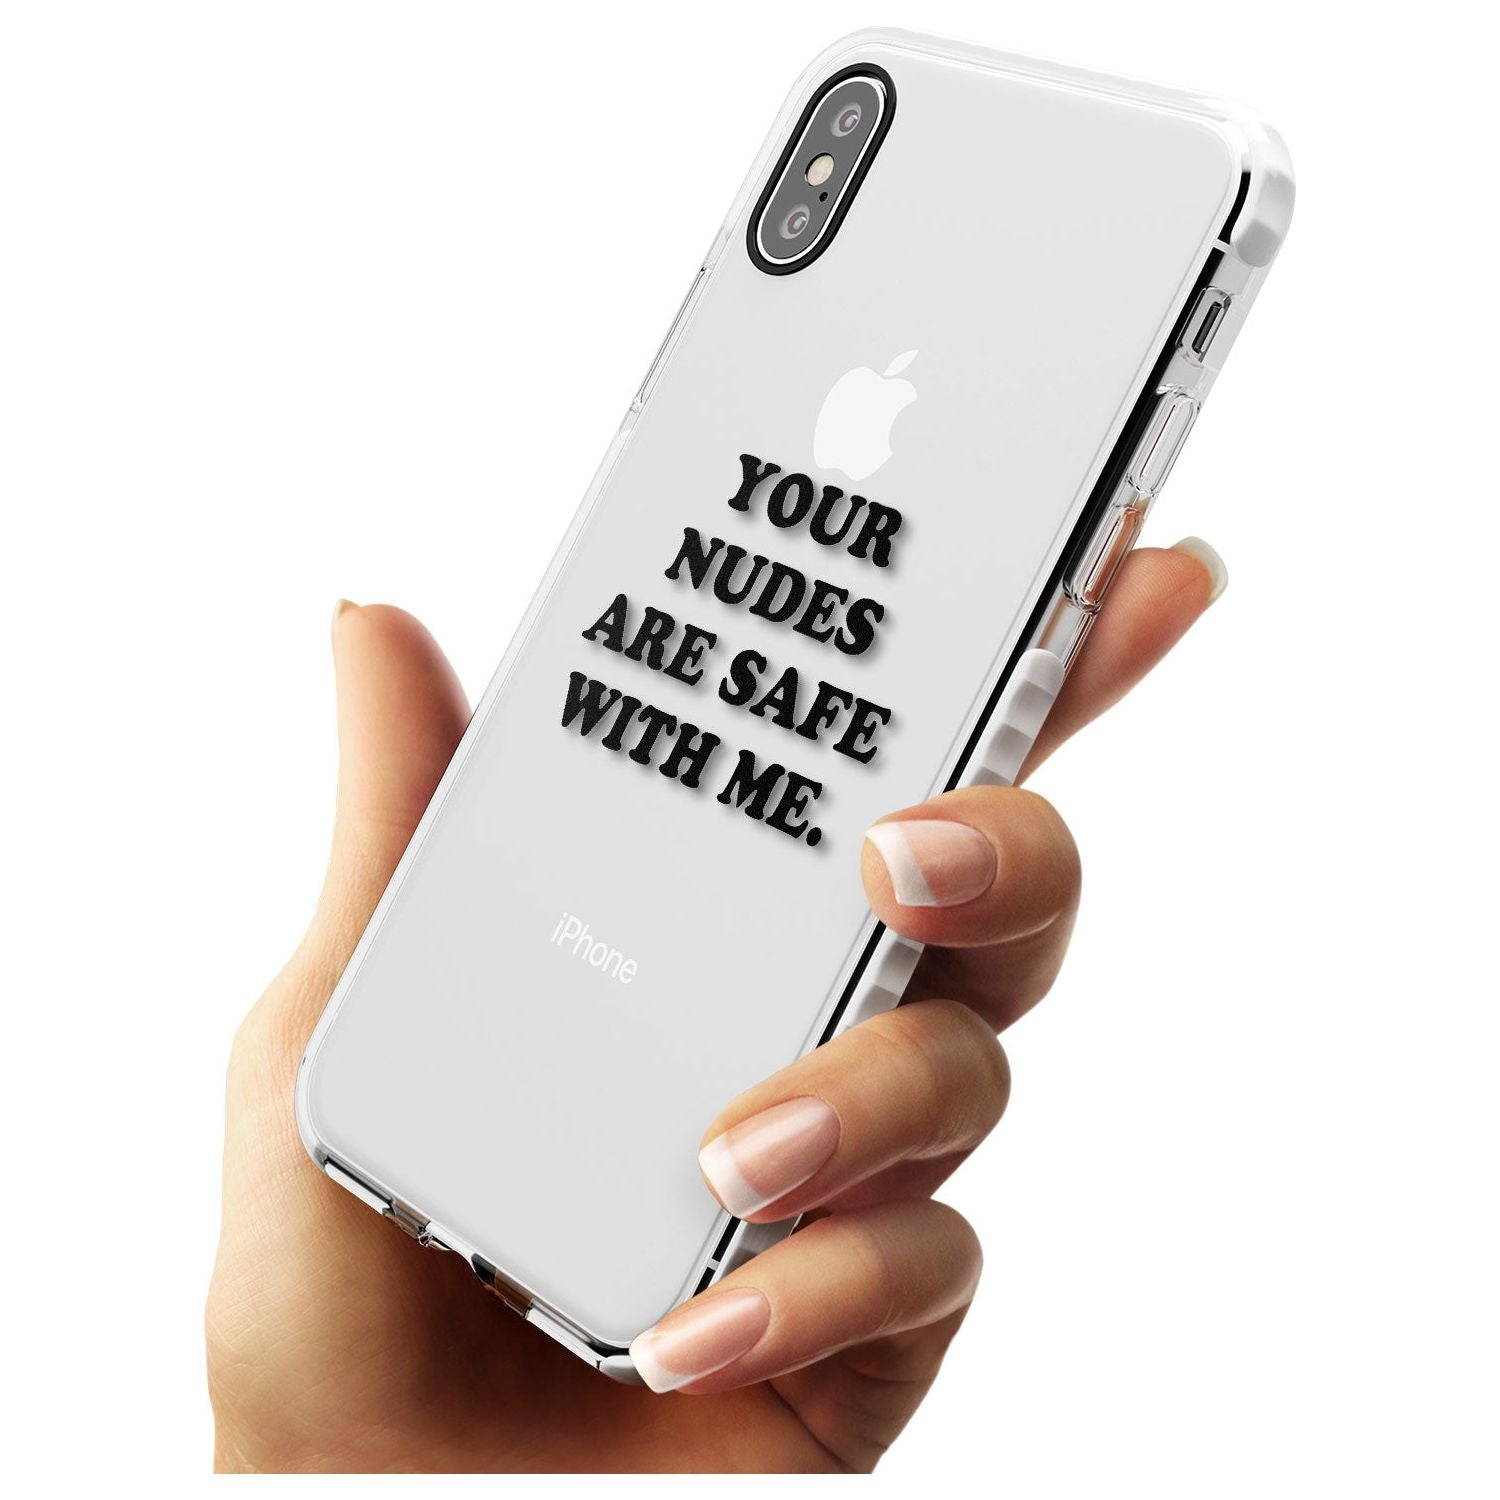 Your nudes are safe with me... BLACK Impact Phone Case for iPhone X XS Max XR